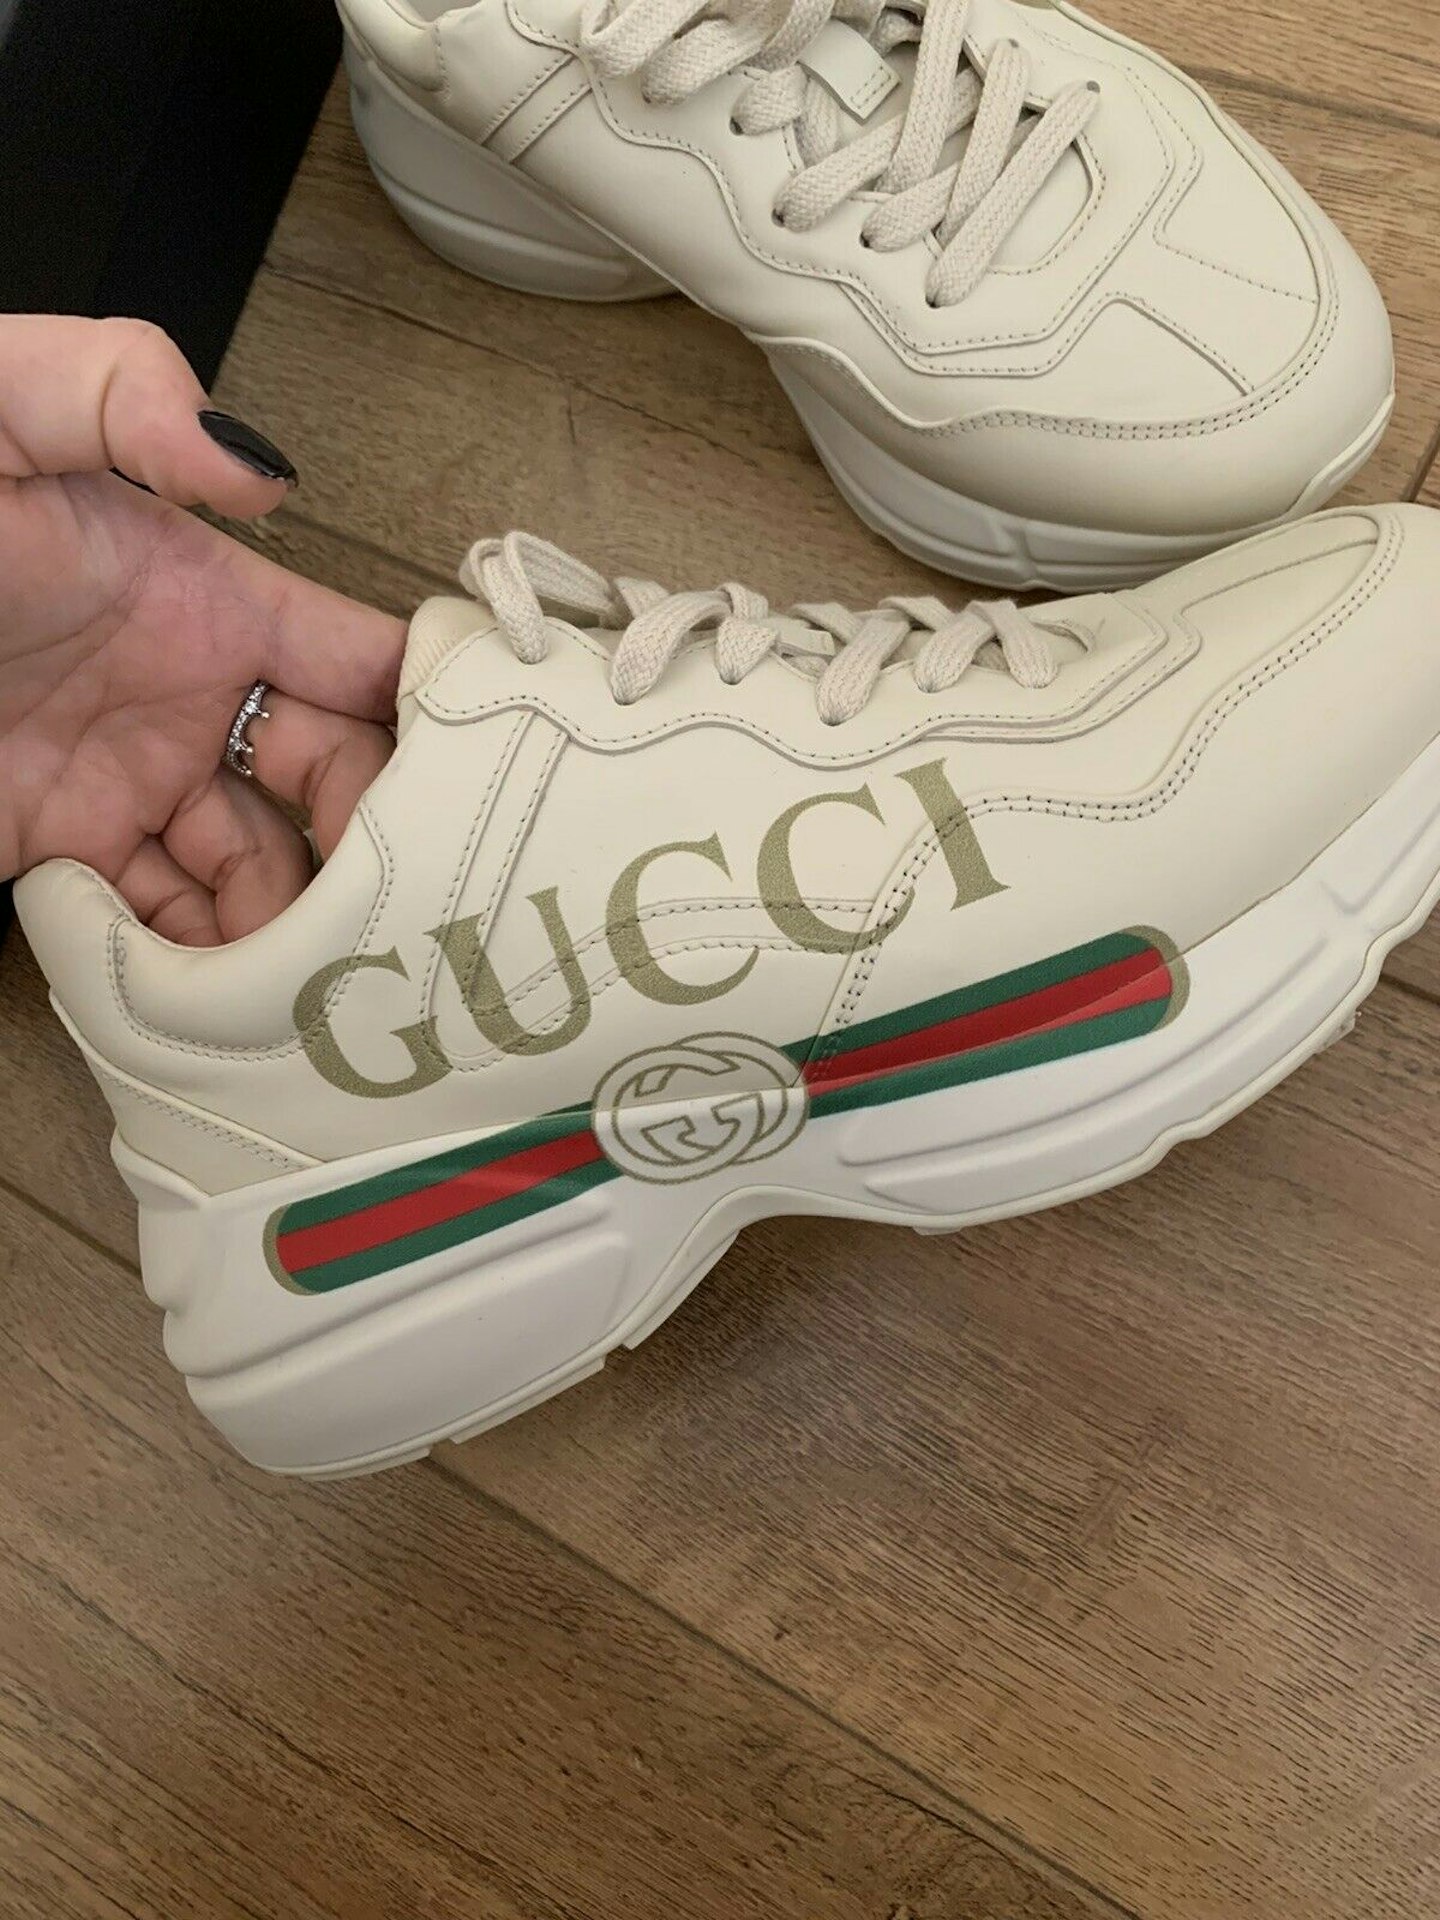 GUCCI Rhyton leather sneakers, £600